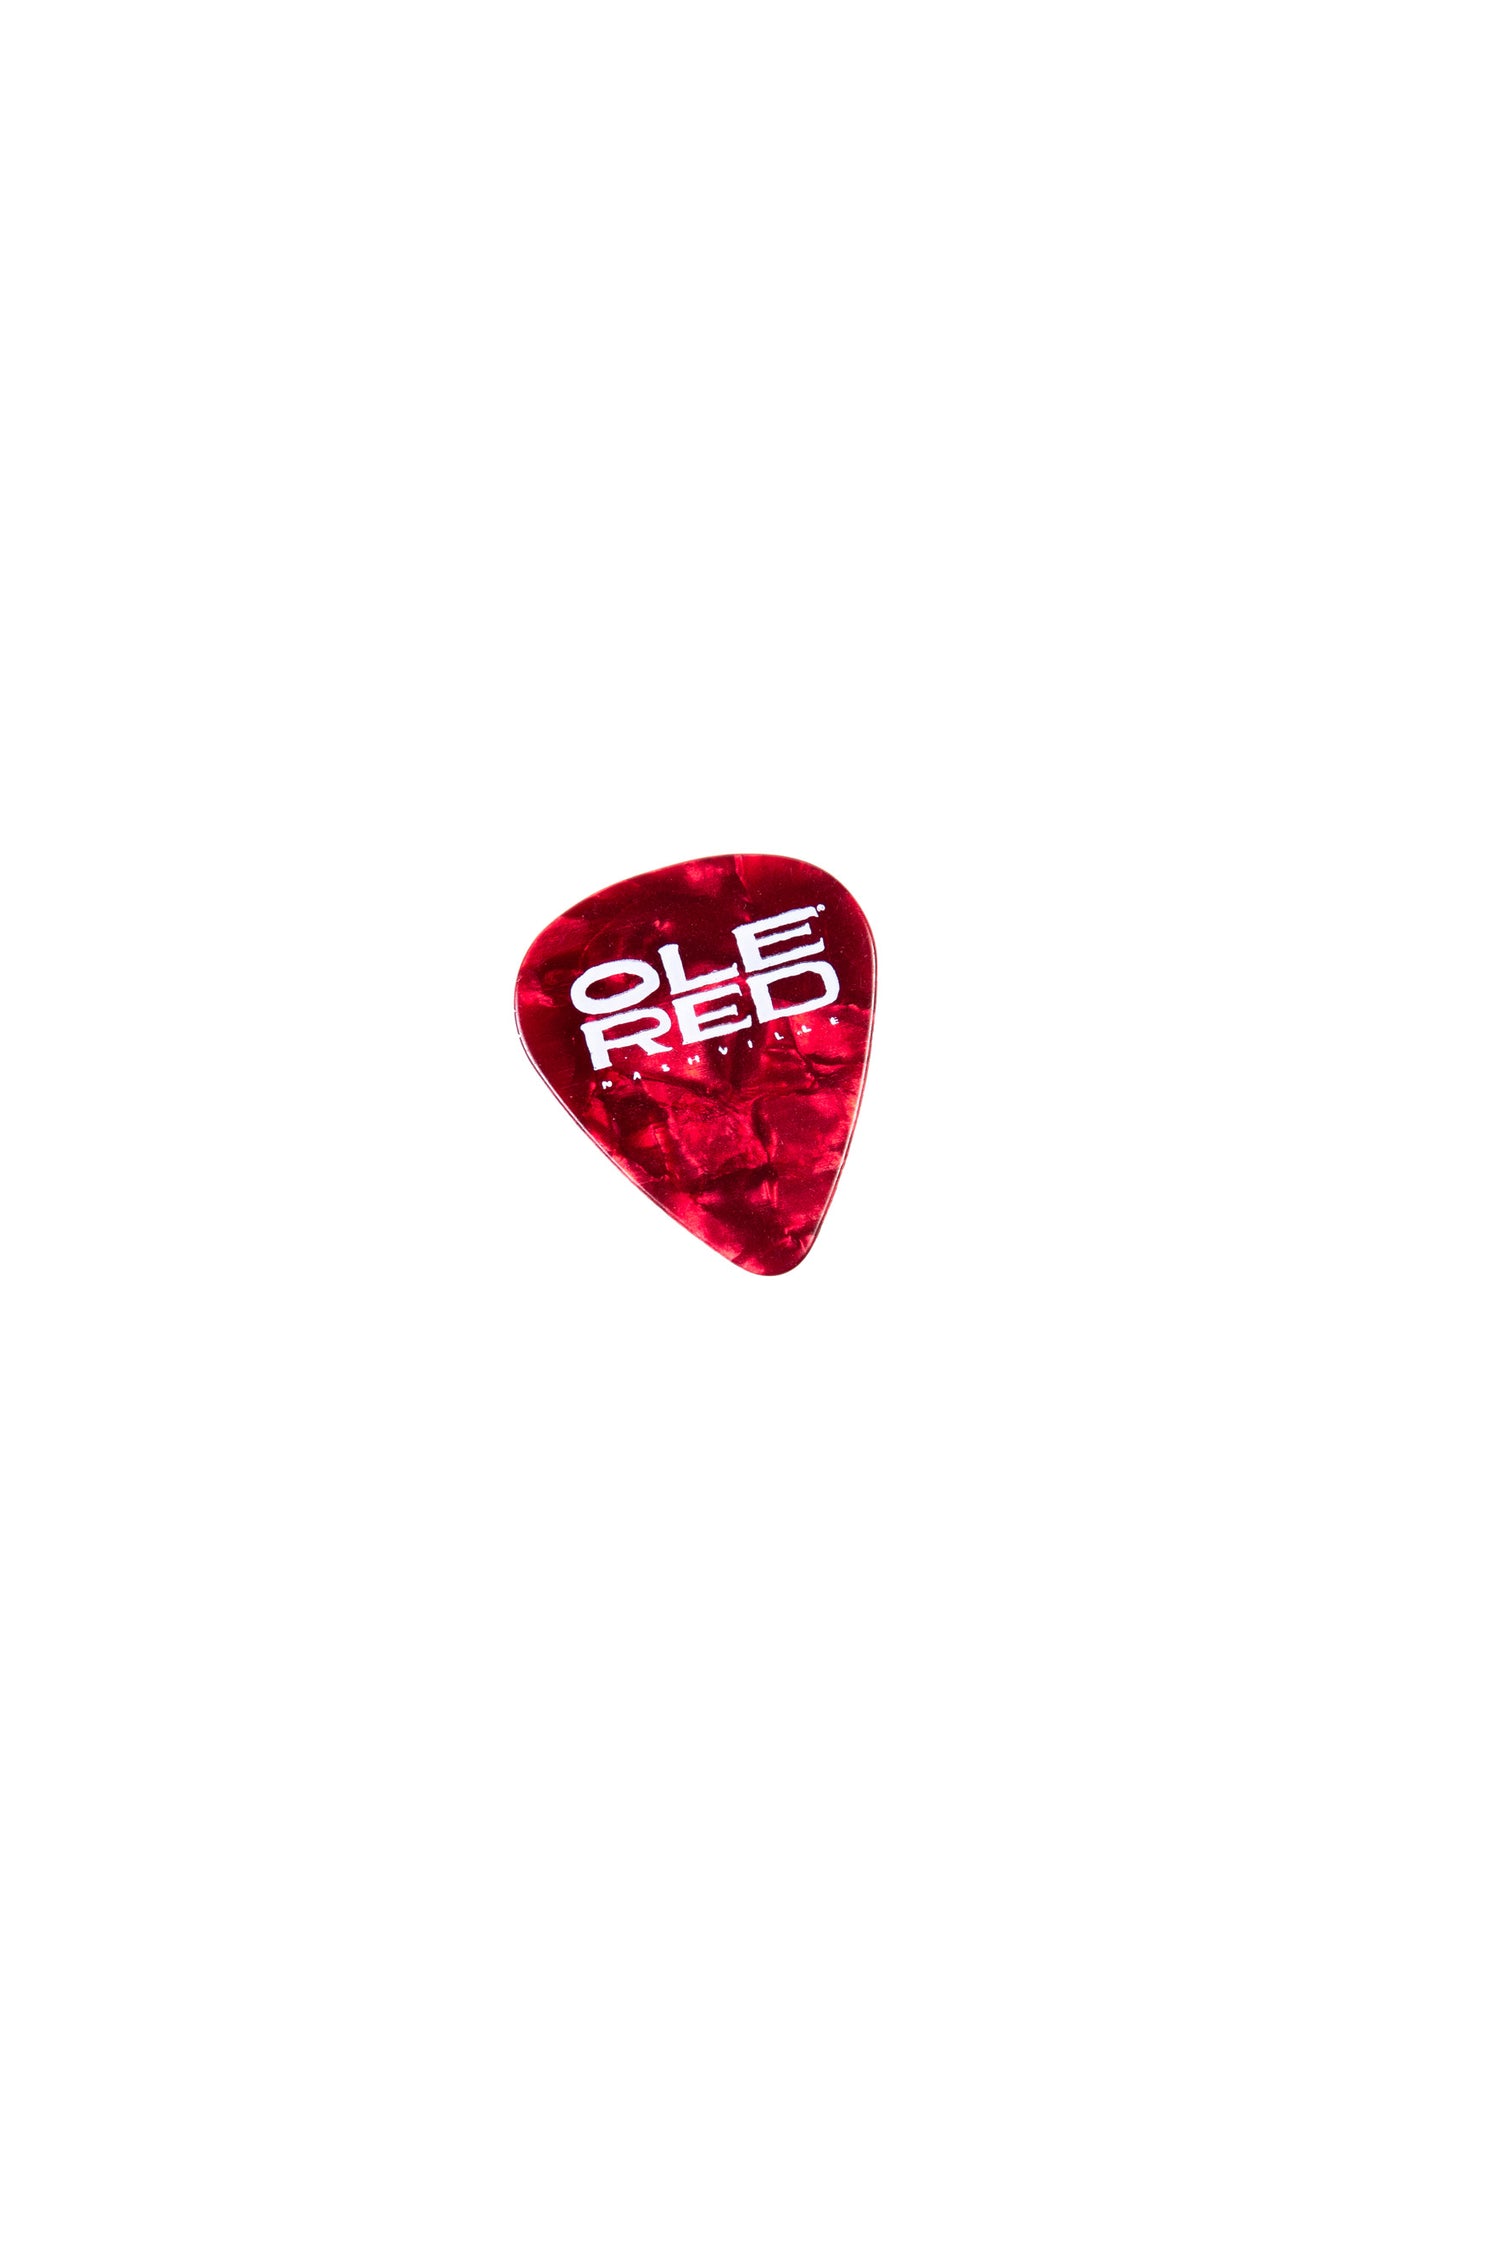 Ole Red Guitar Pick